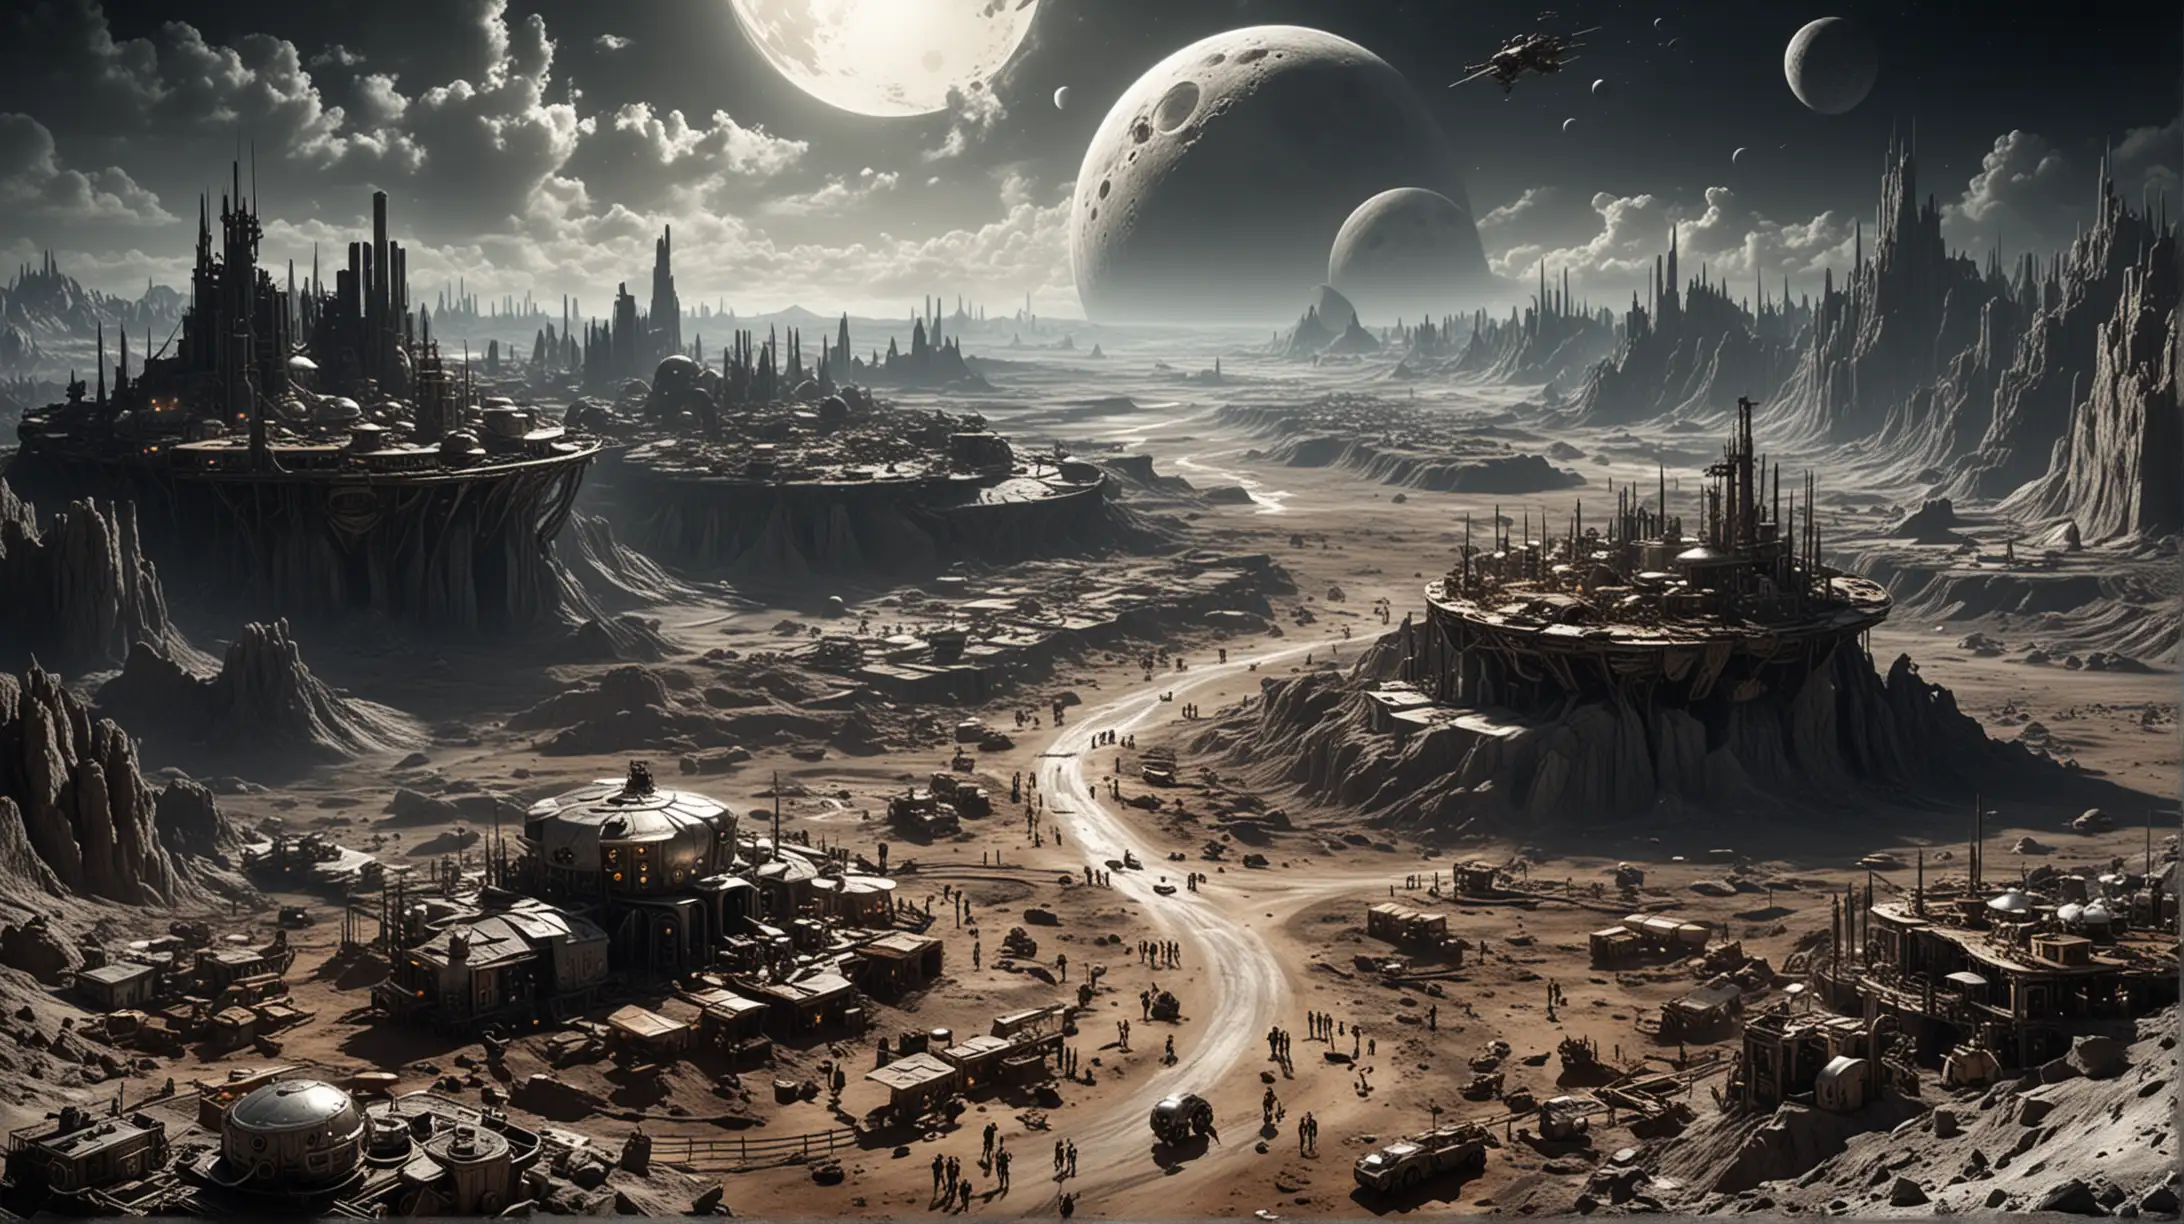 a steampunk city on the Moon, much shadow, silver blaze, no atmosphere, all people in space uniforms, a crater on the horizon, bird's eye view